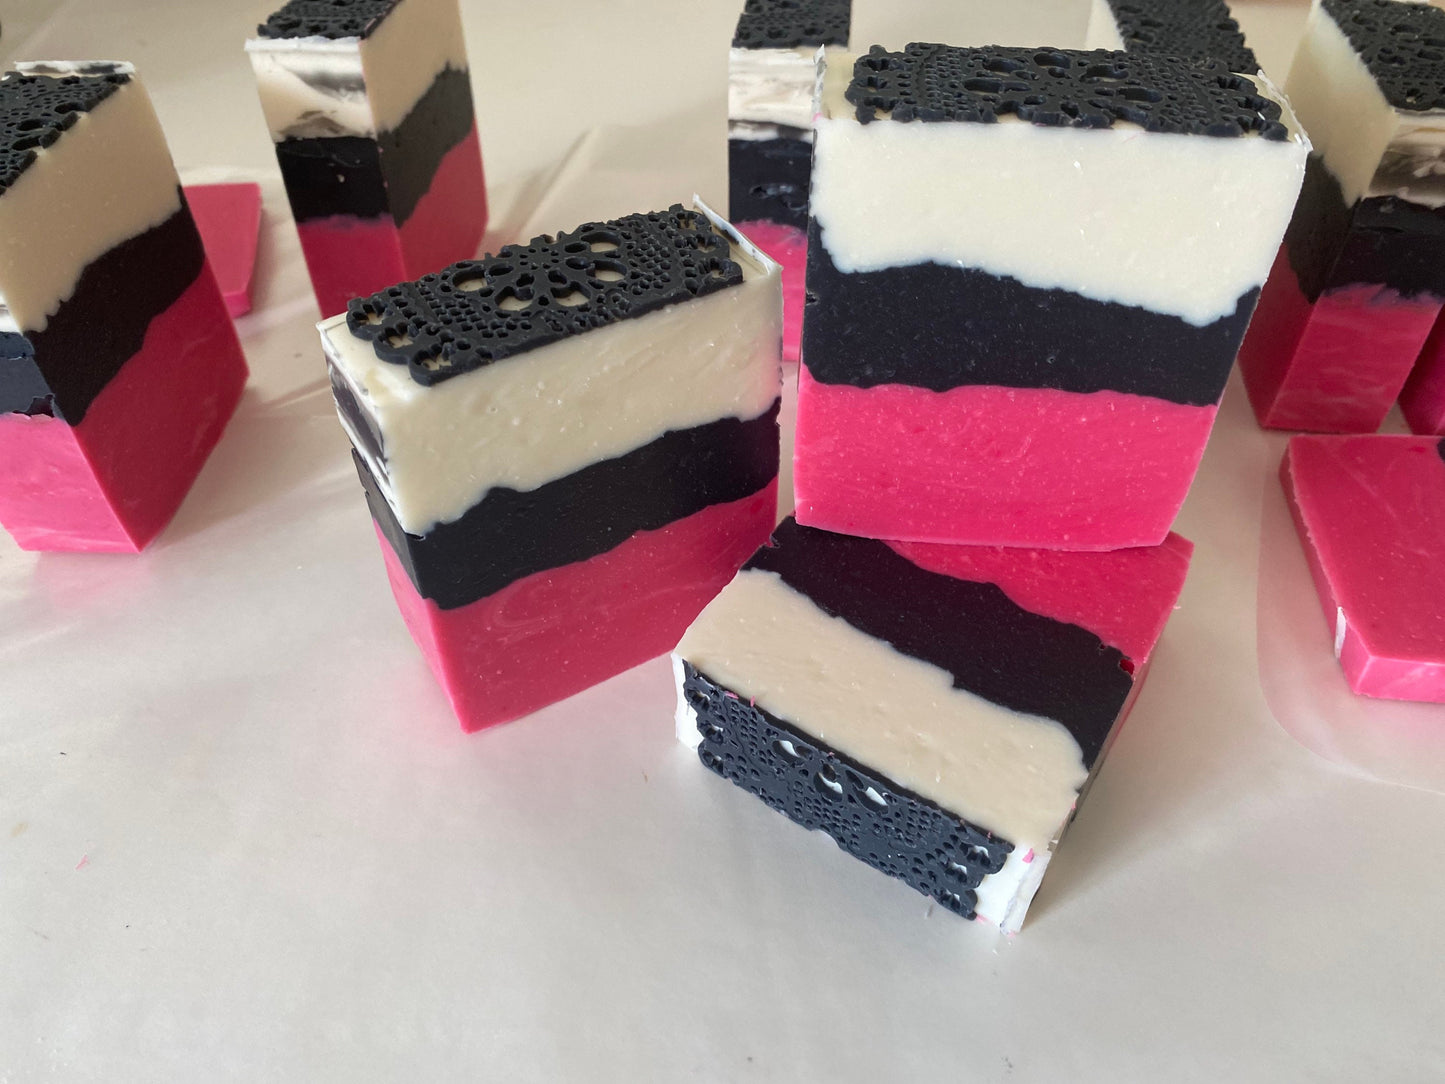 Lacy Rosewood Mother’s Day Handmade Soap Bars